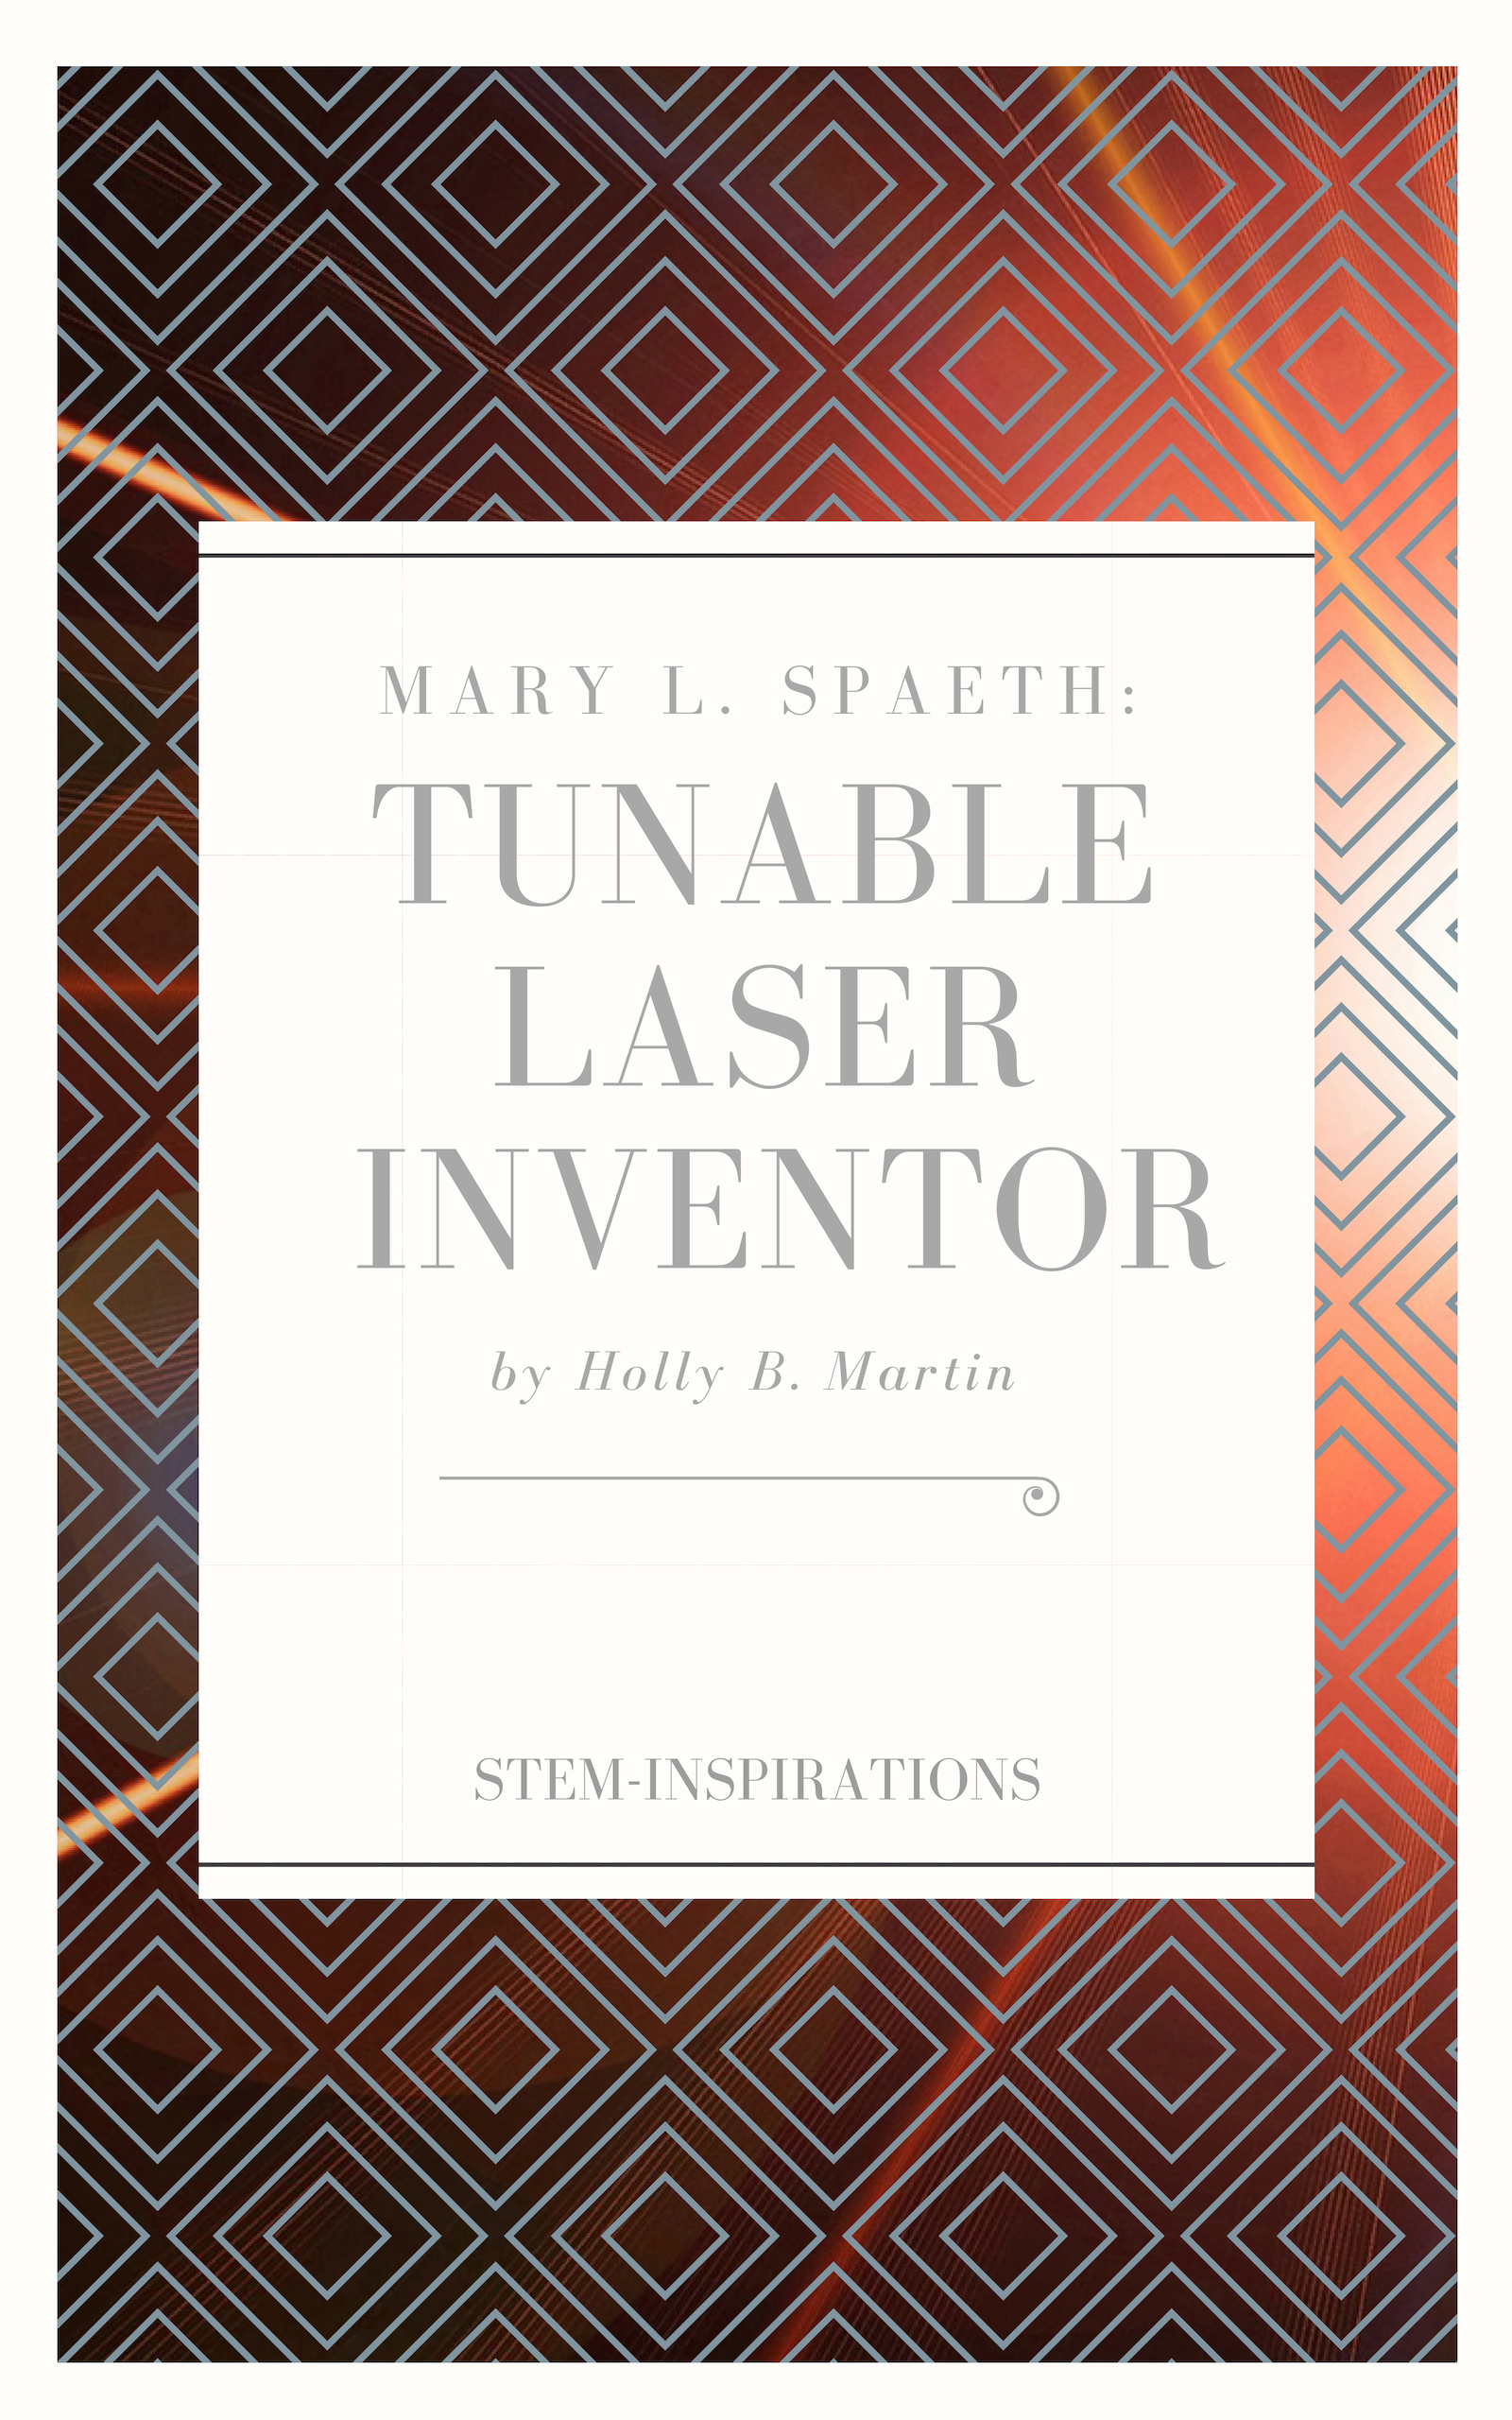 Mary L. Spaeth: Tunable Laser Inventor